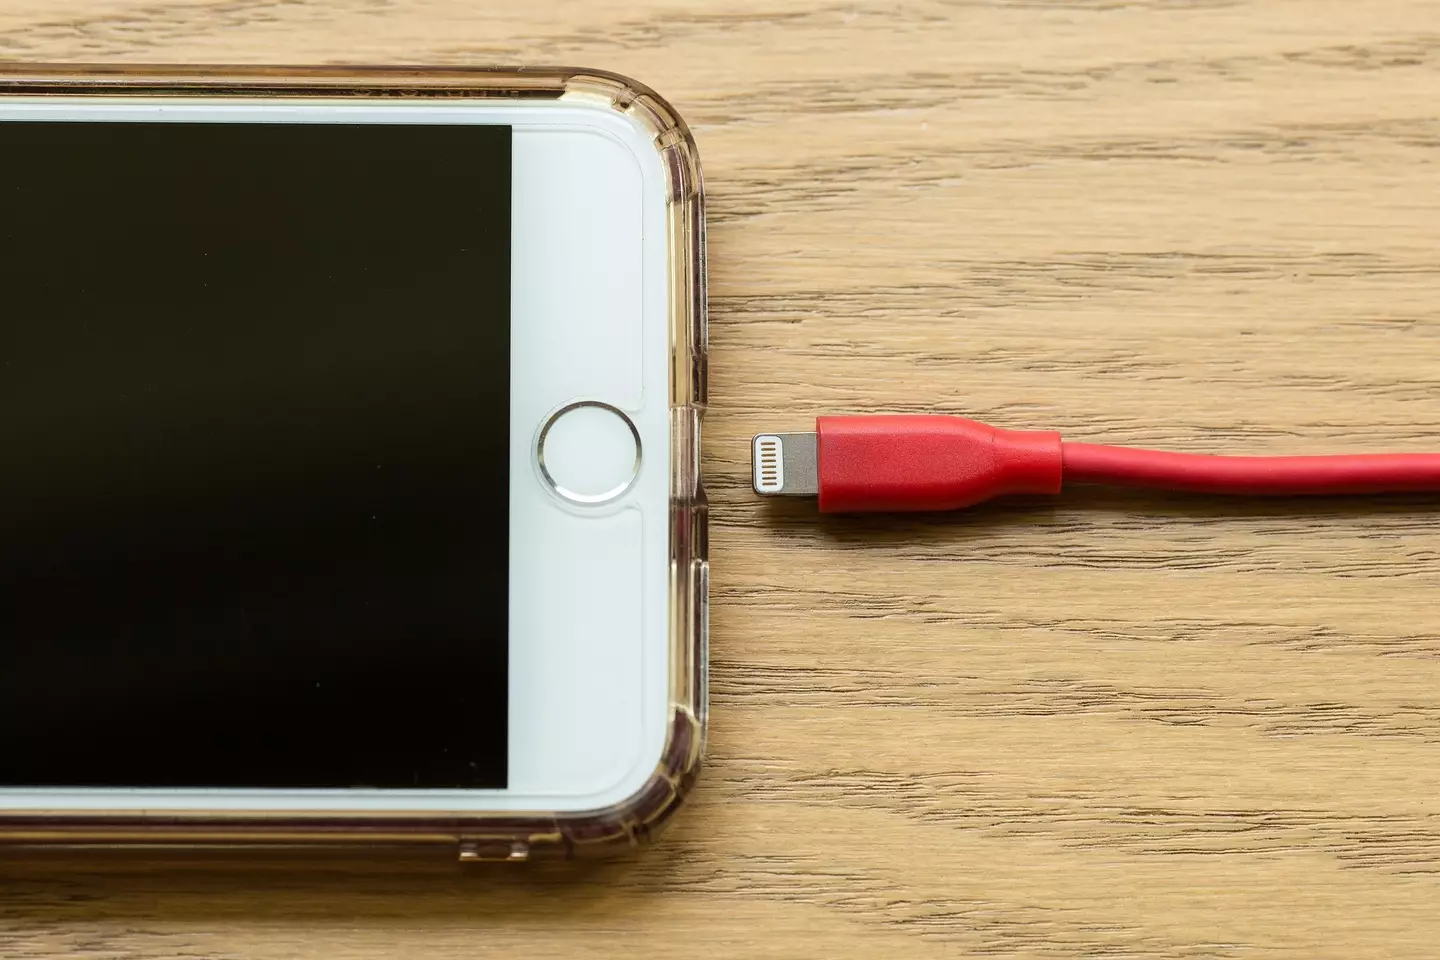 Apple's charging cables are currently smaller than USB-C.